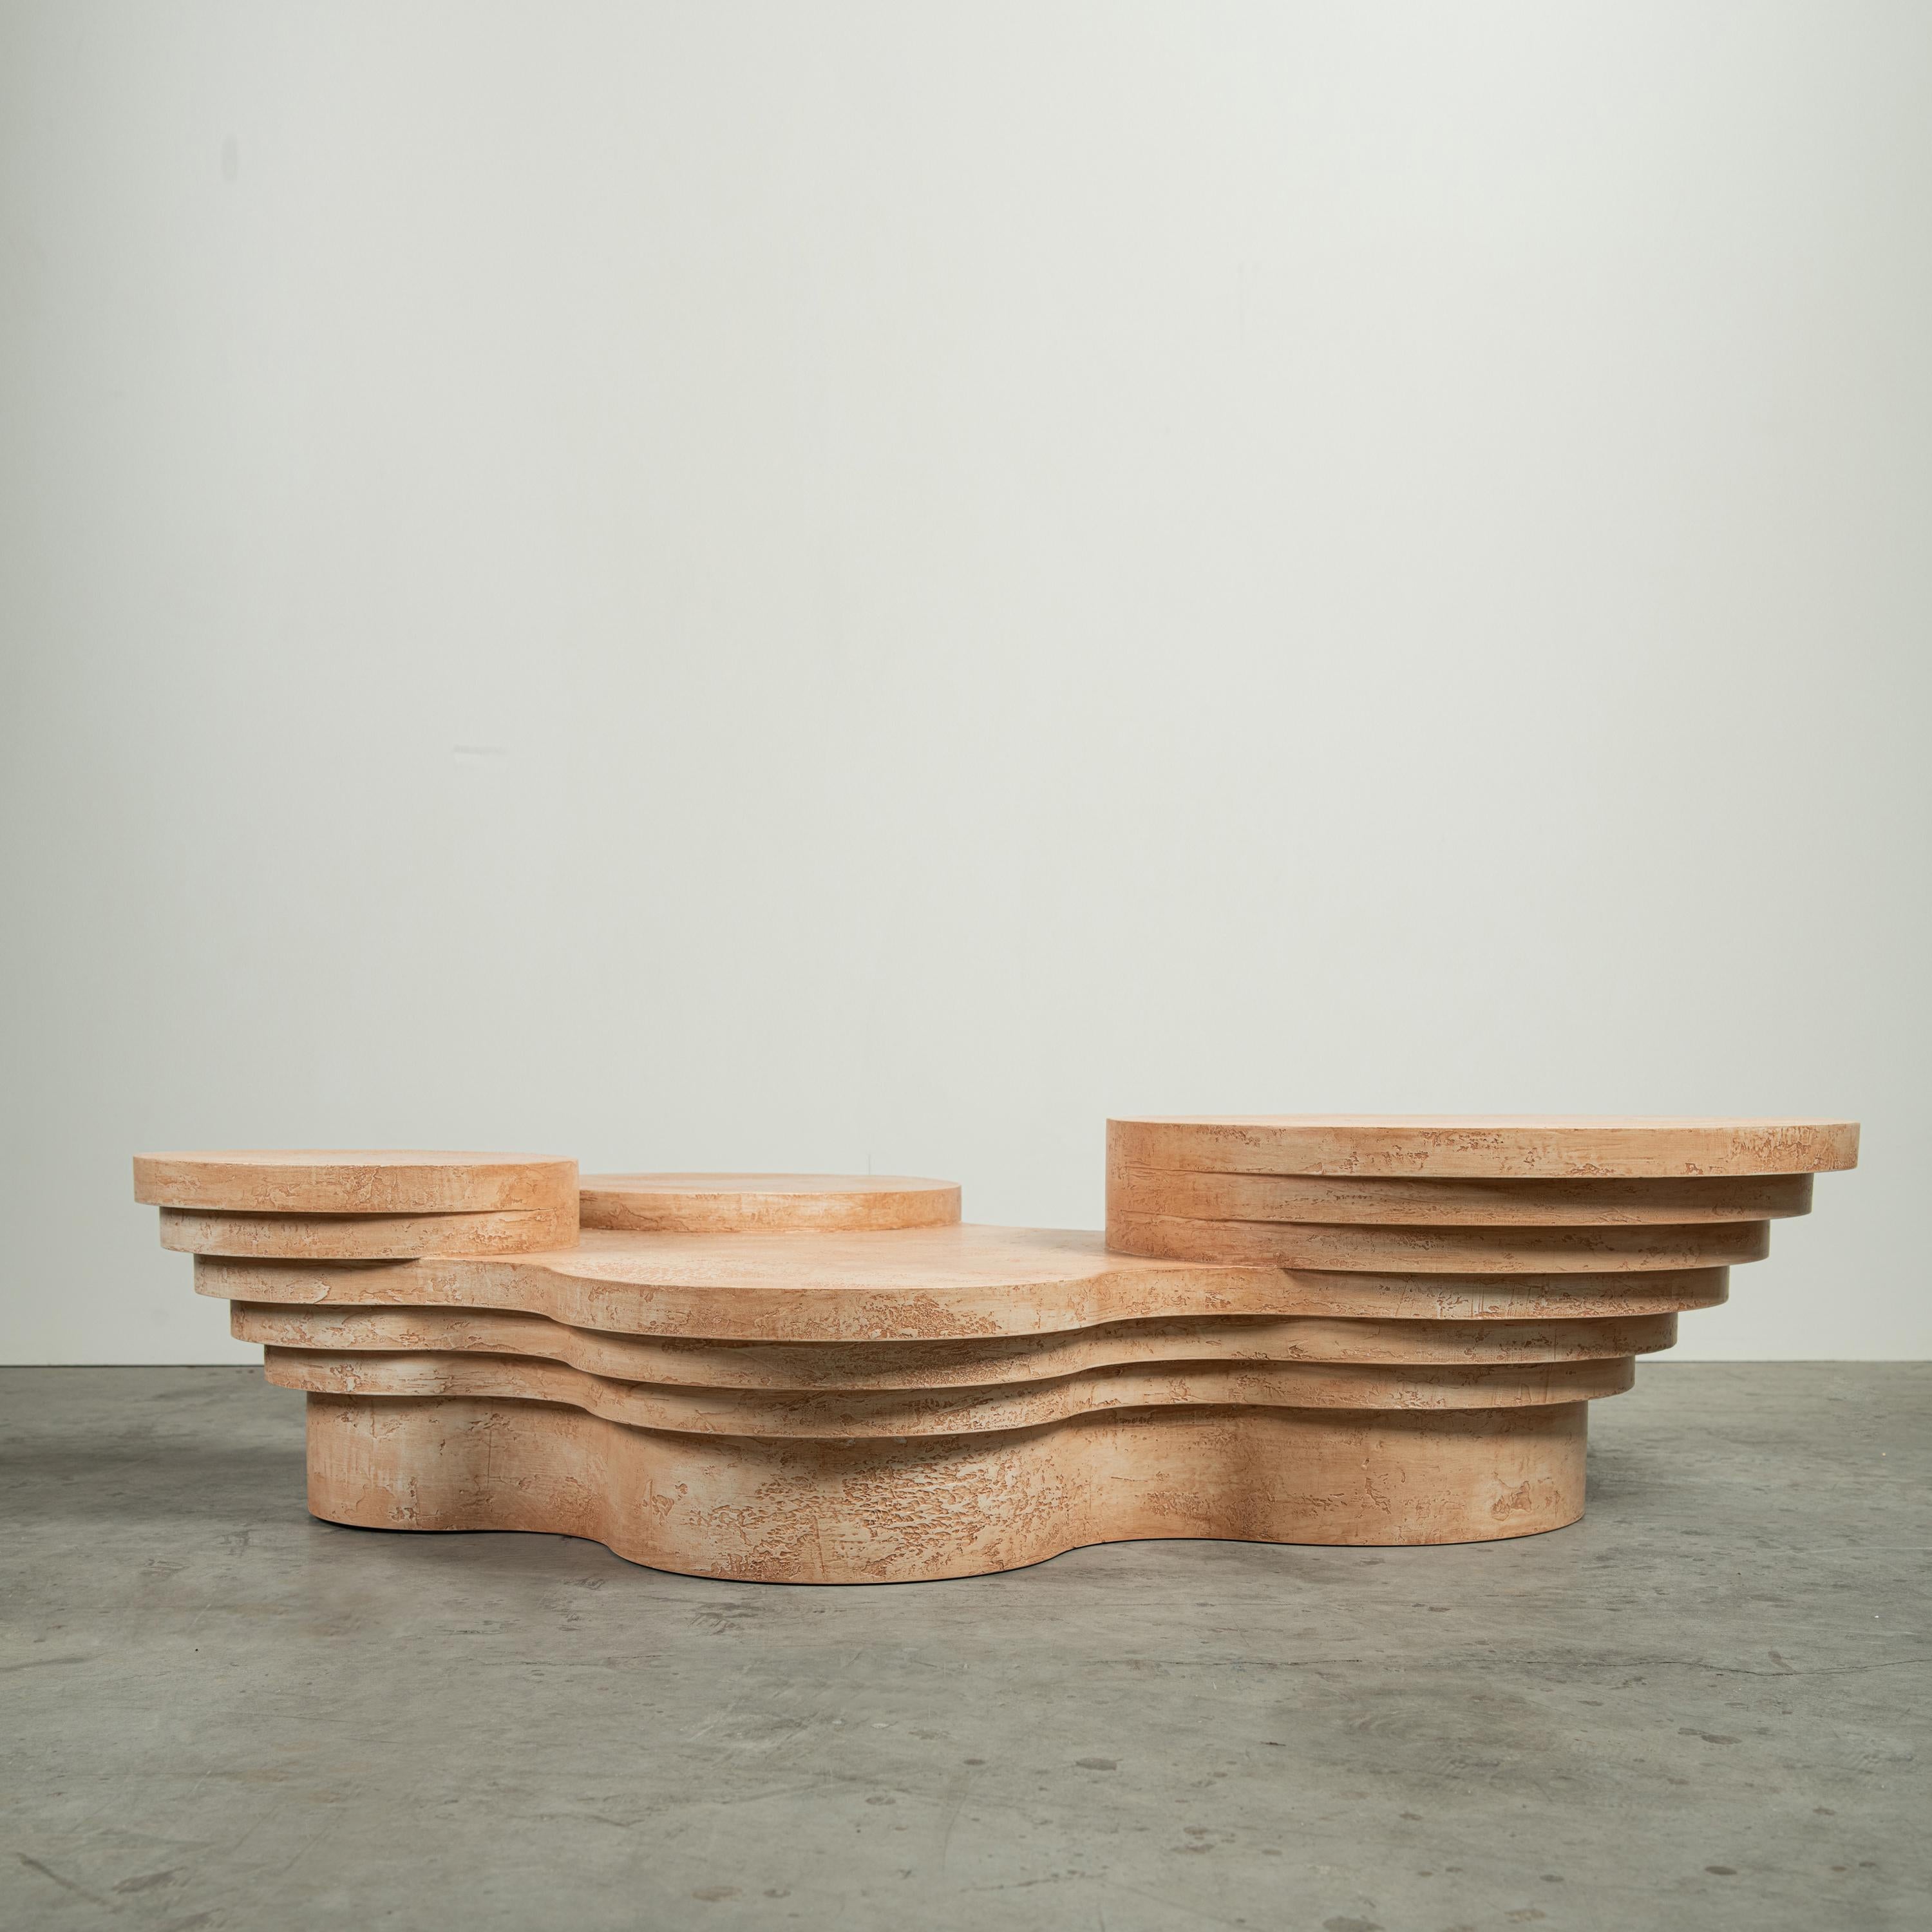 Slice Me Up sculptural coffee table by Pietro Franceschini
Sold exclusively by Galerie Philia
Manufacturer: We Do
Dimensions: W 160 x L 120 x H 36 cm
Materials: Radica di Betulla Matte.


Pietro Franceschini is an architect and designer based in New